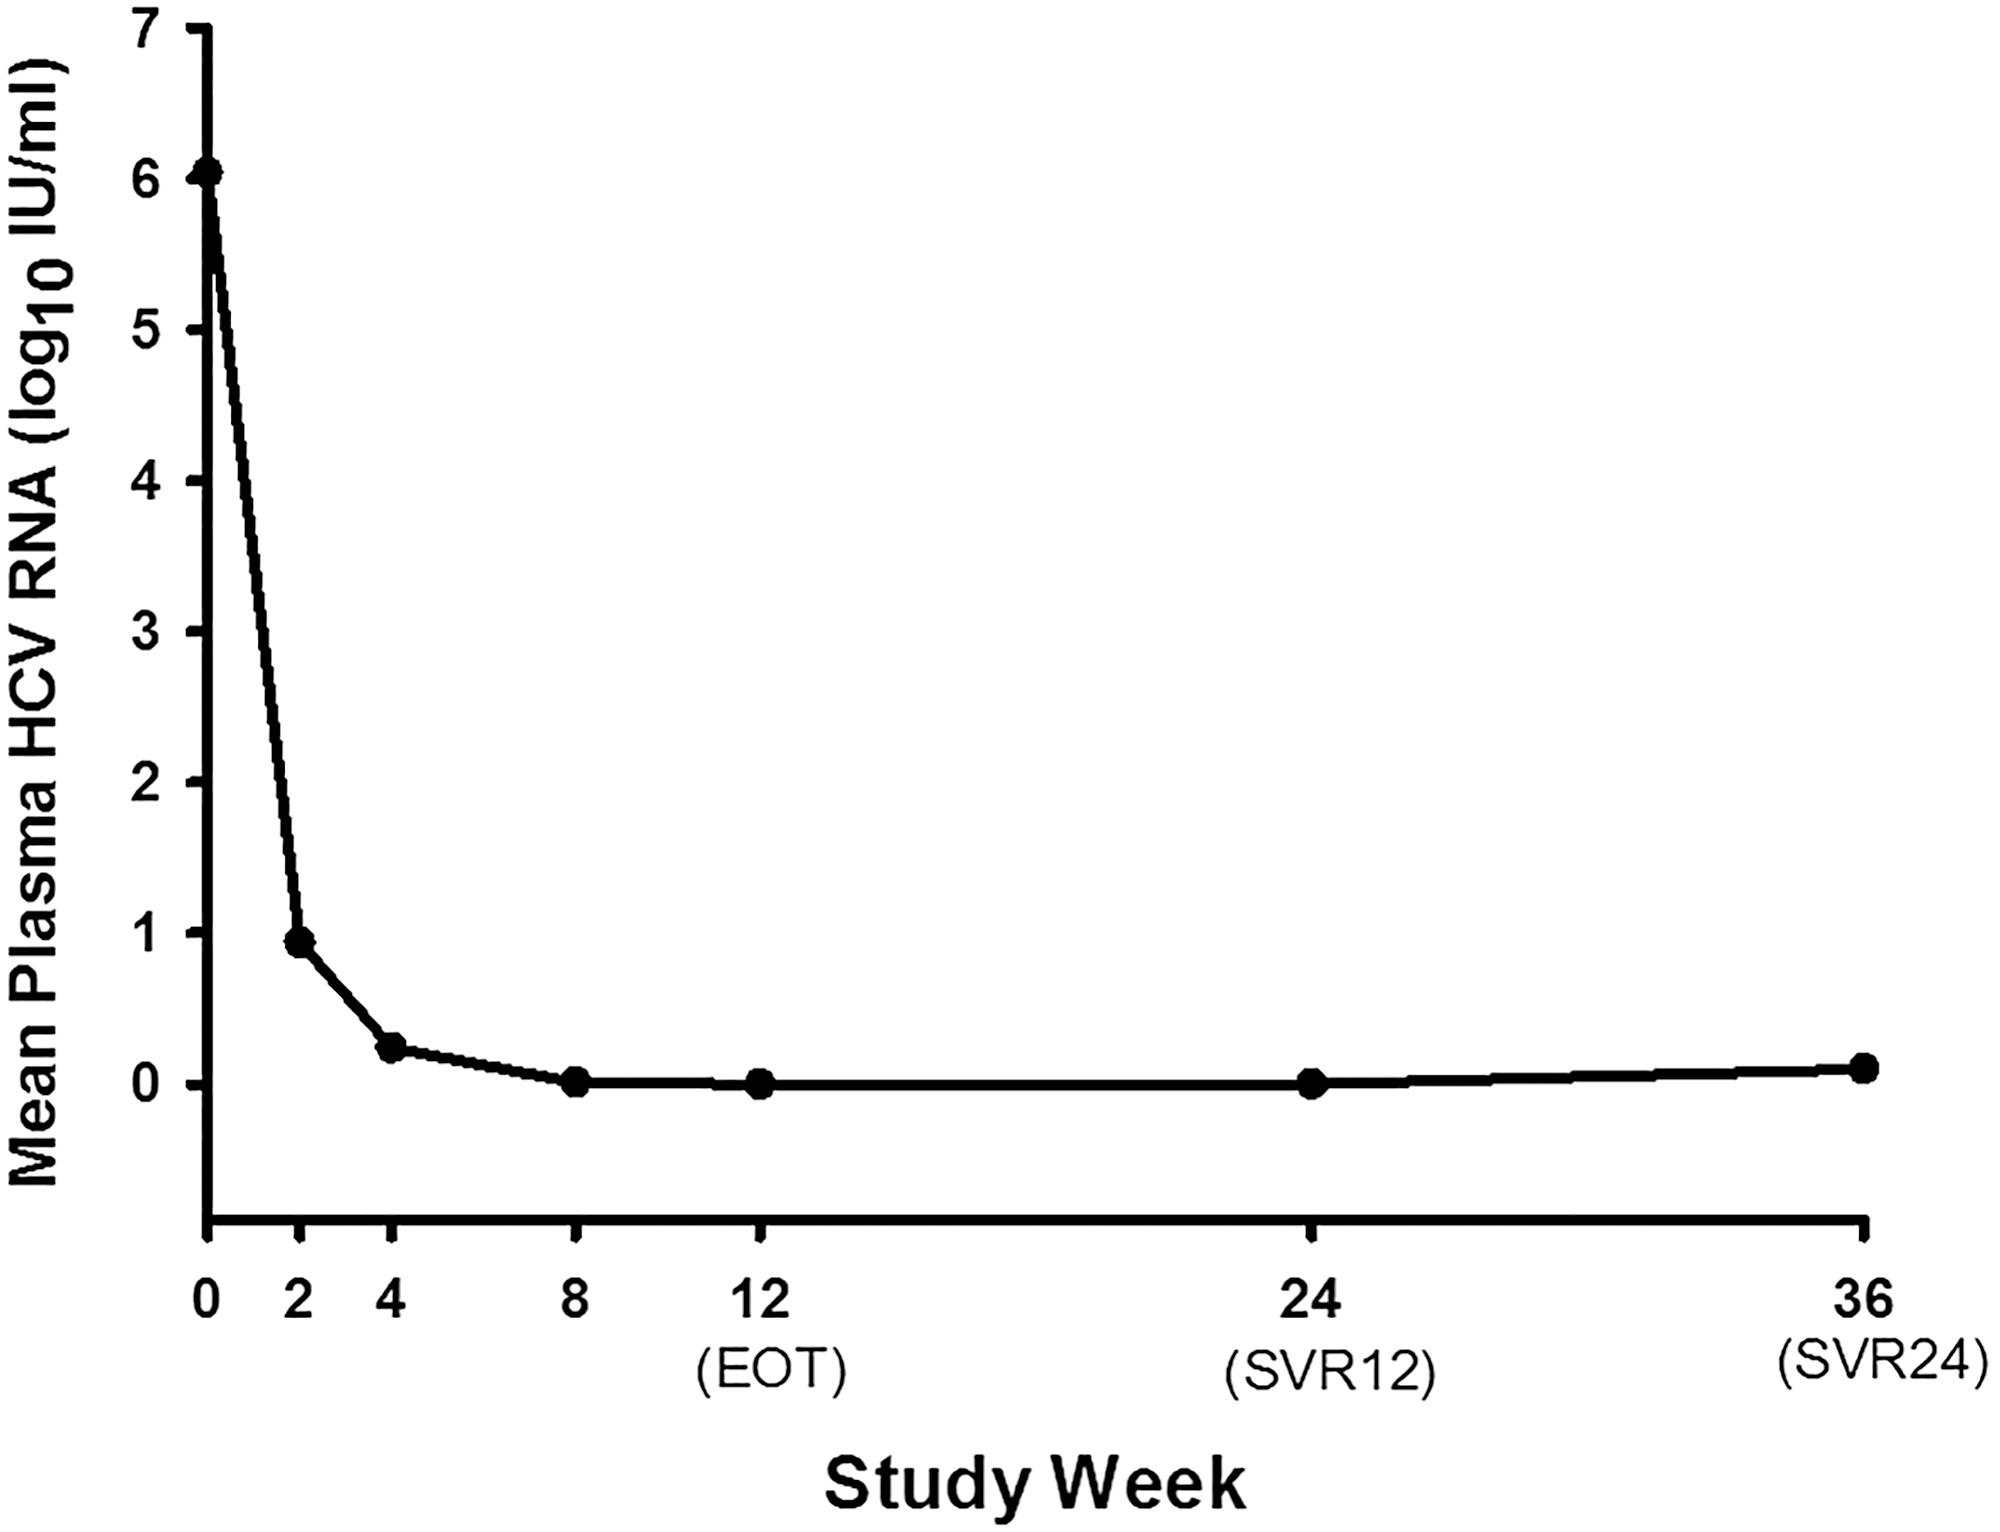 Mean plasma HCV RNA change during the treatment of all the patients who completed the treatment.